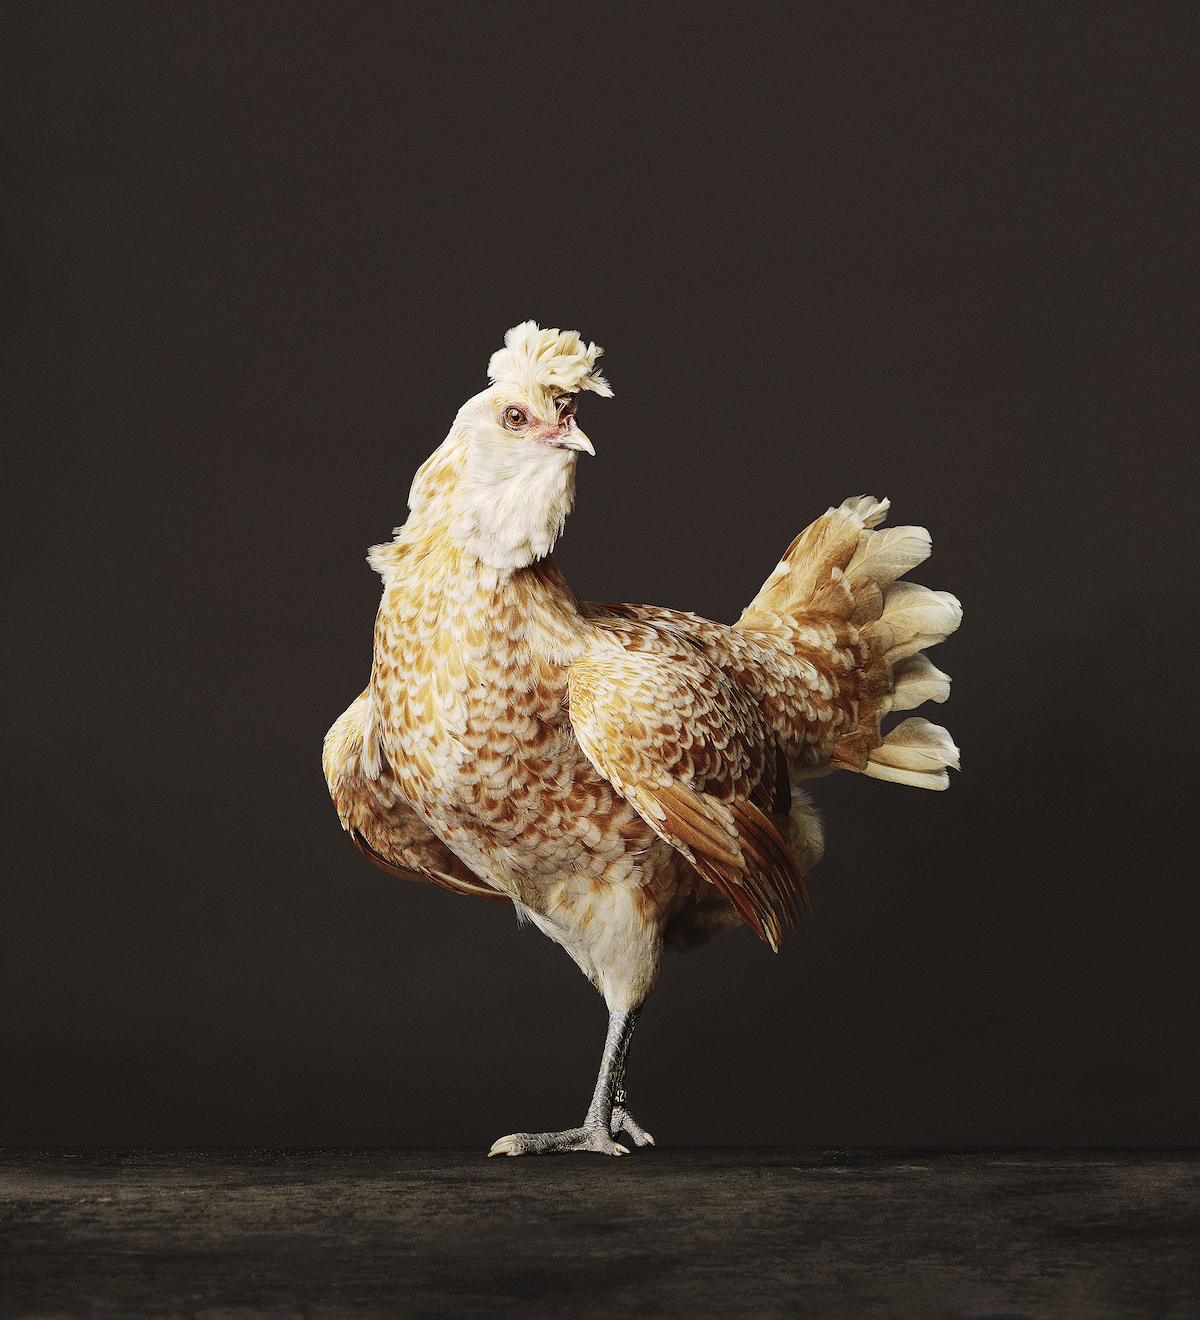 Portraits of Chickens, Hens, and Roosters by Alex ten Napel